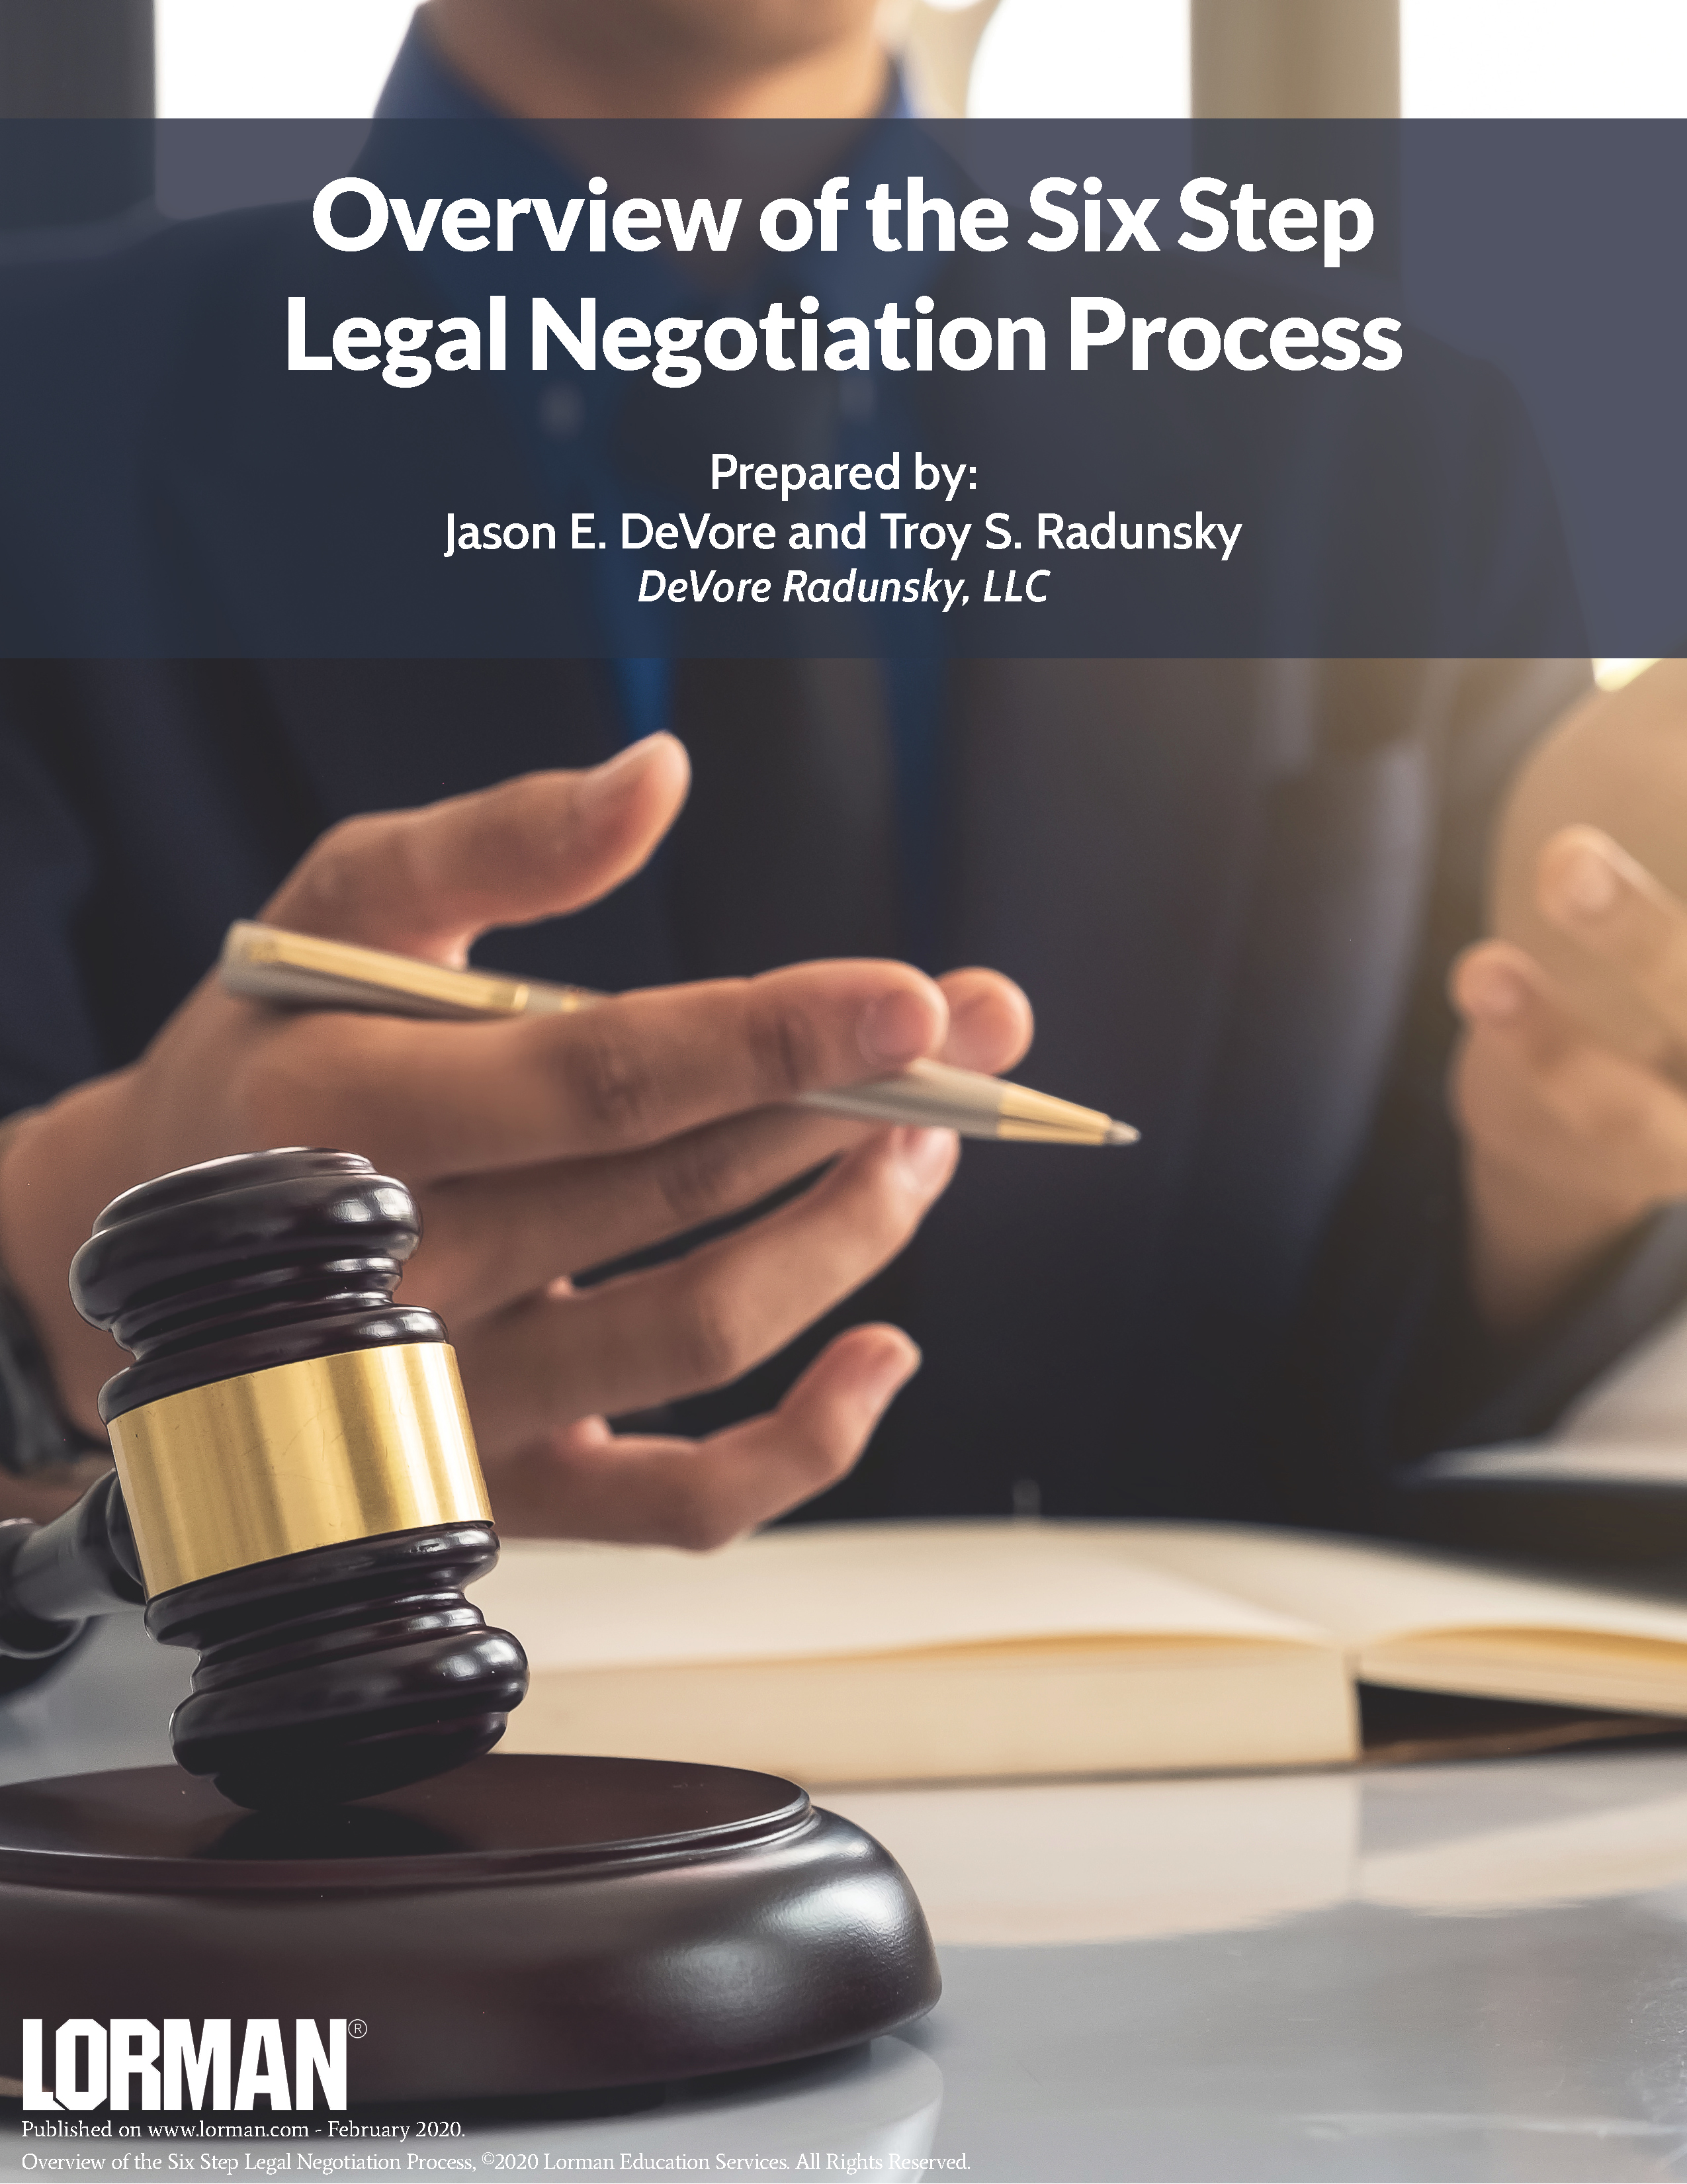 Overview of the Six Step Legal Negotiation Process